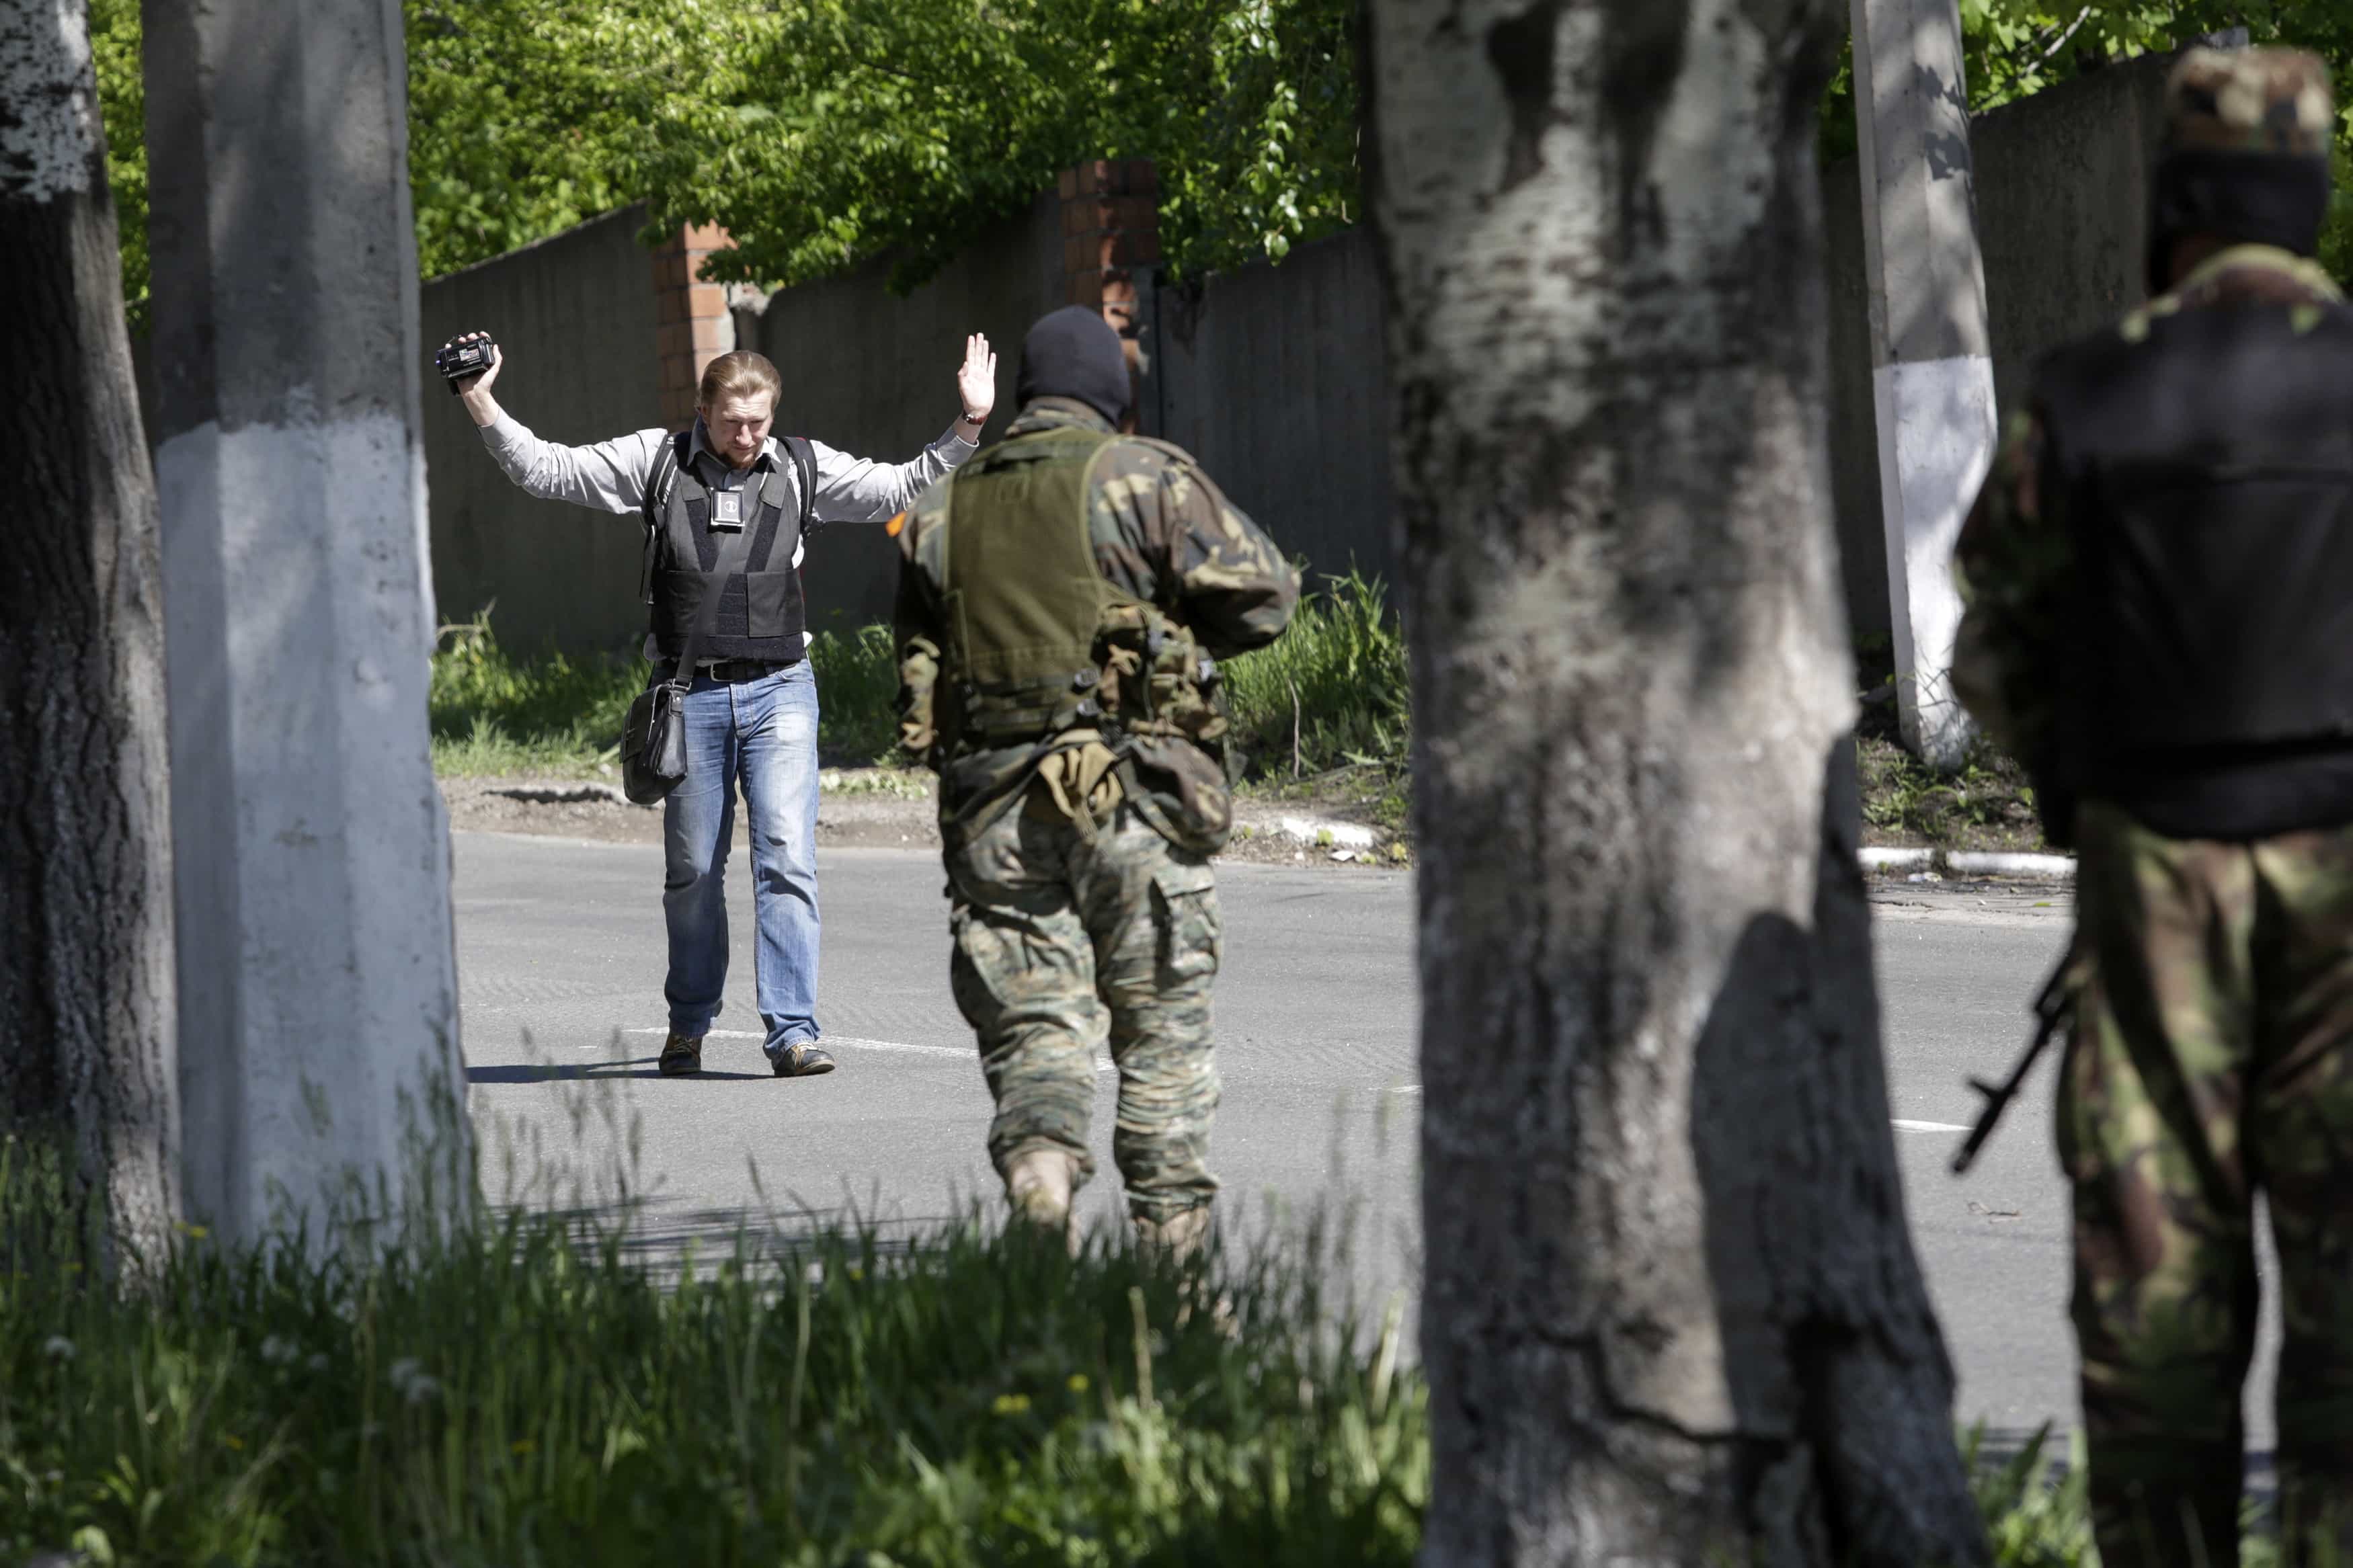 Pro-Russian armed separatists check a journalist at gunpoint in Donetsk May 6, 2014. , REUTERS/Konstantin Chernichkin